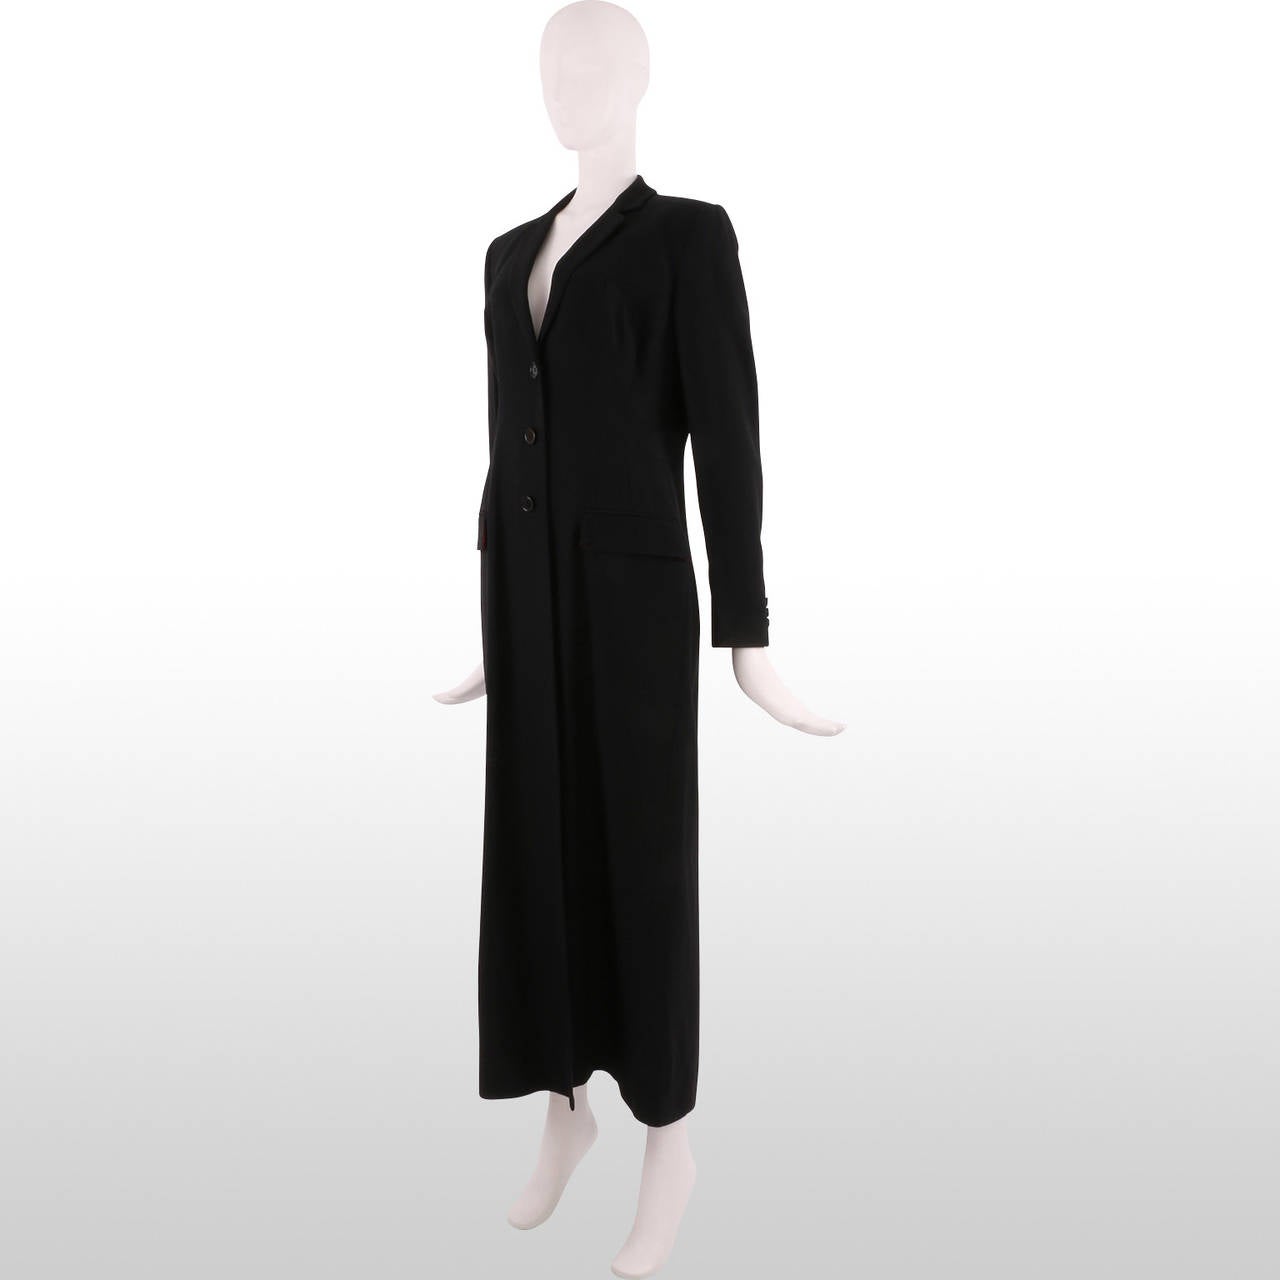 This beautiful piece is a Dolce & Gabbana creation. The bright black and the length of the garment gives an elegant touch to any look, while the slightly fitted cut makes it just feminine enough. This will be perfect for a classy night out. The coat